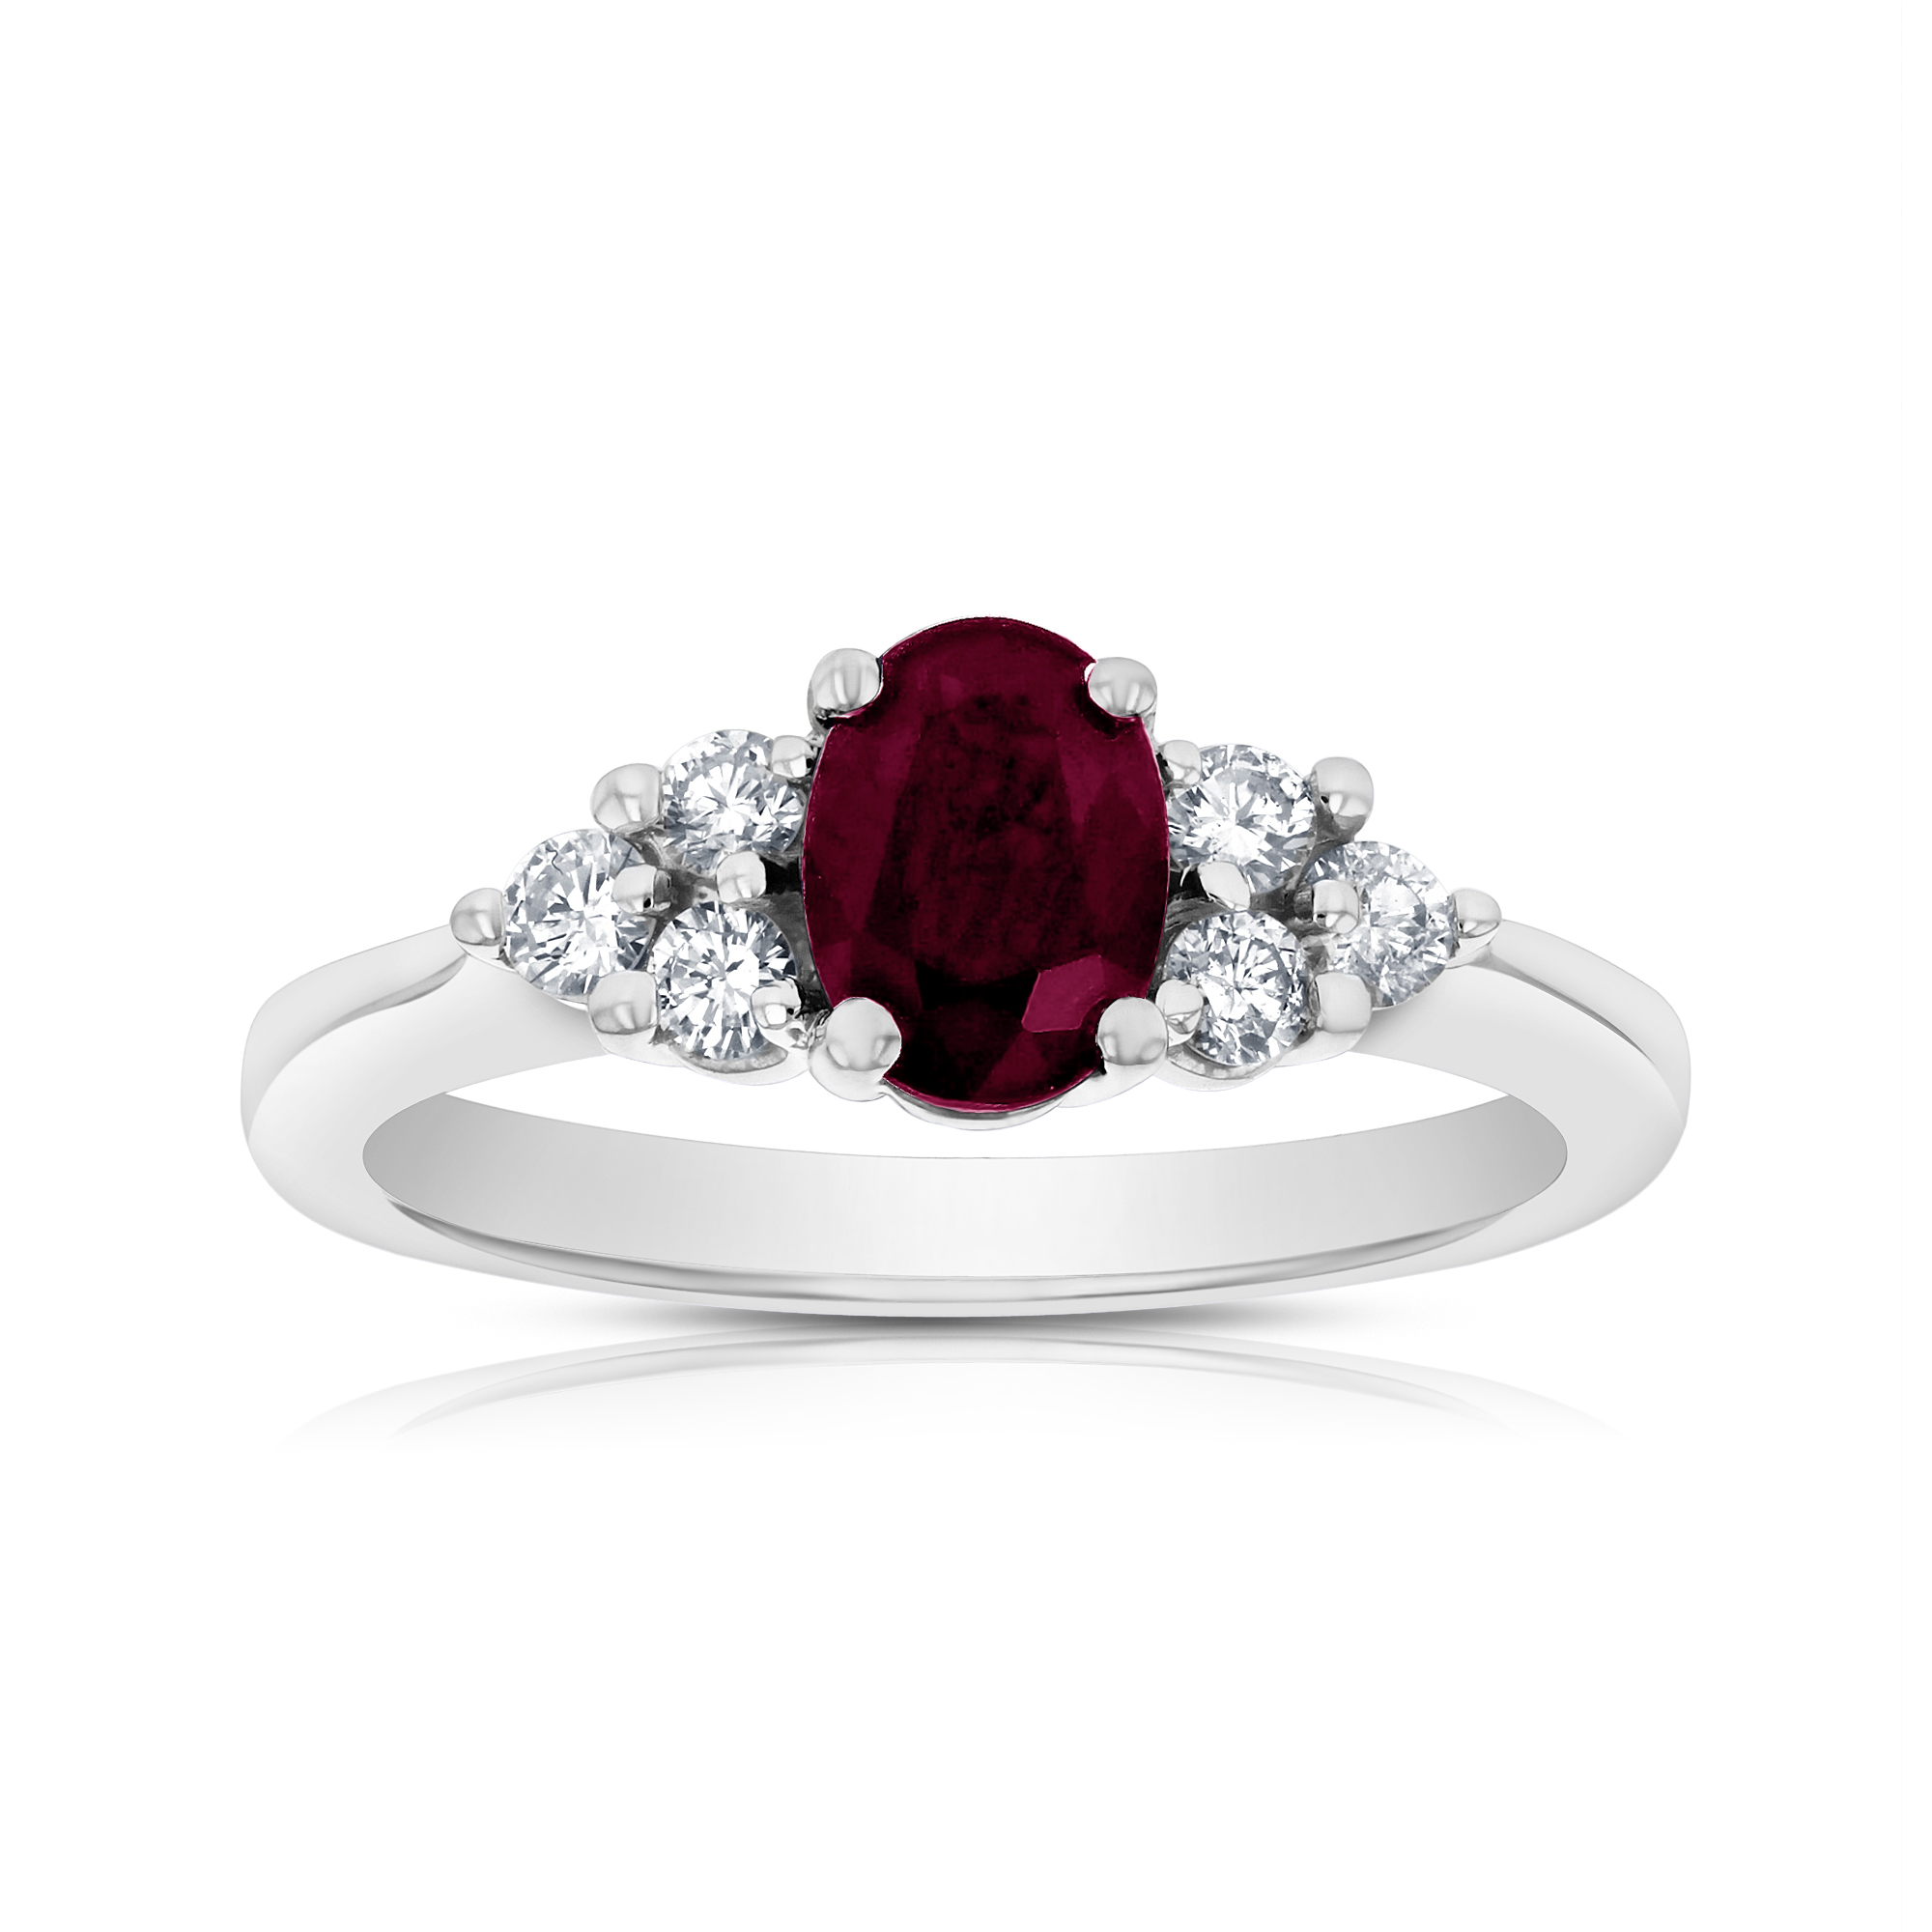 View 0.30ctw Diamond and Ruby Ring in 14k Gold